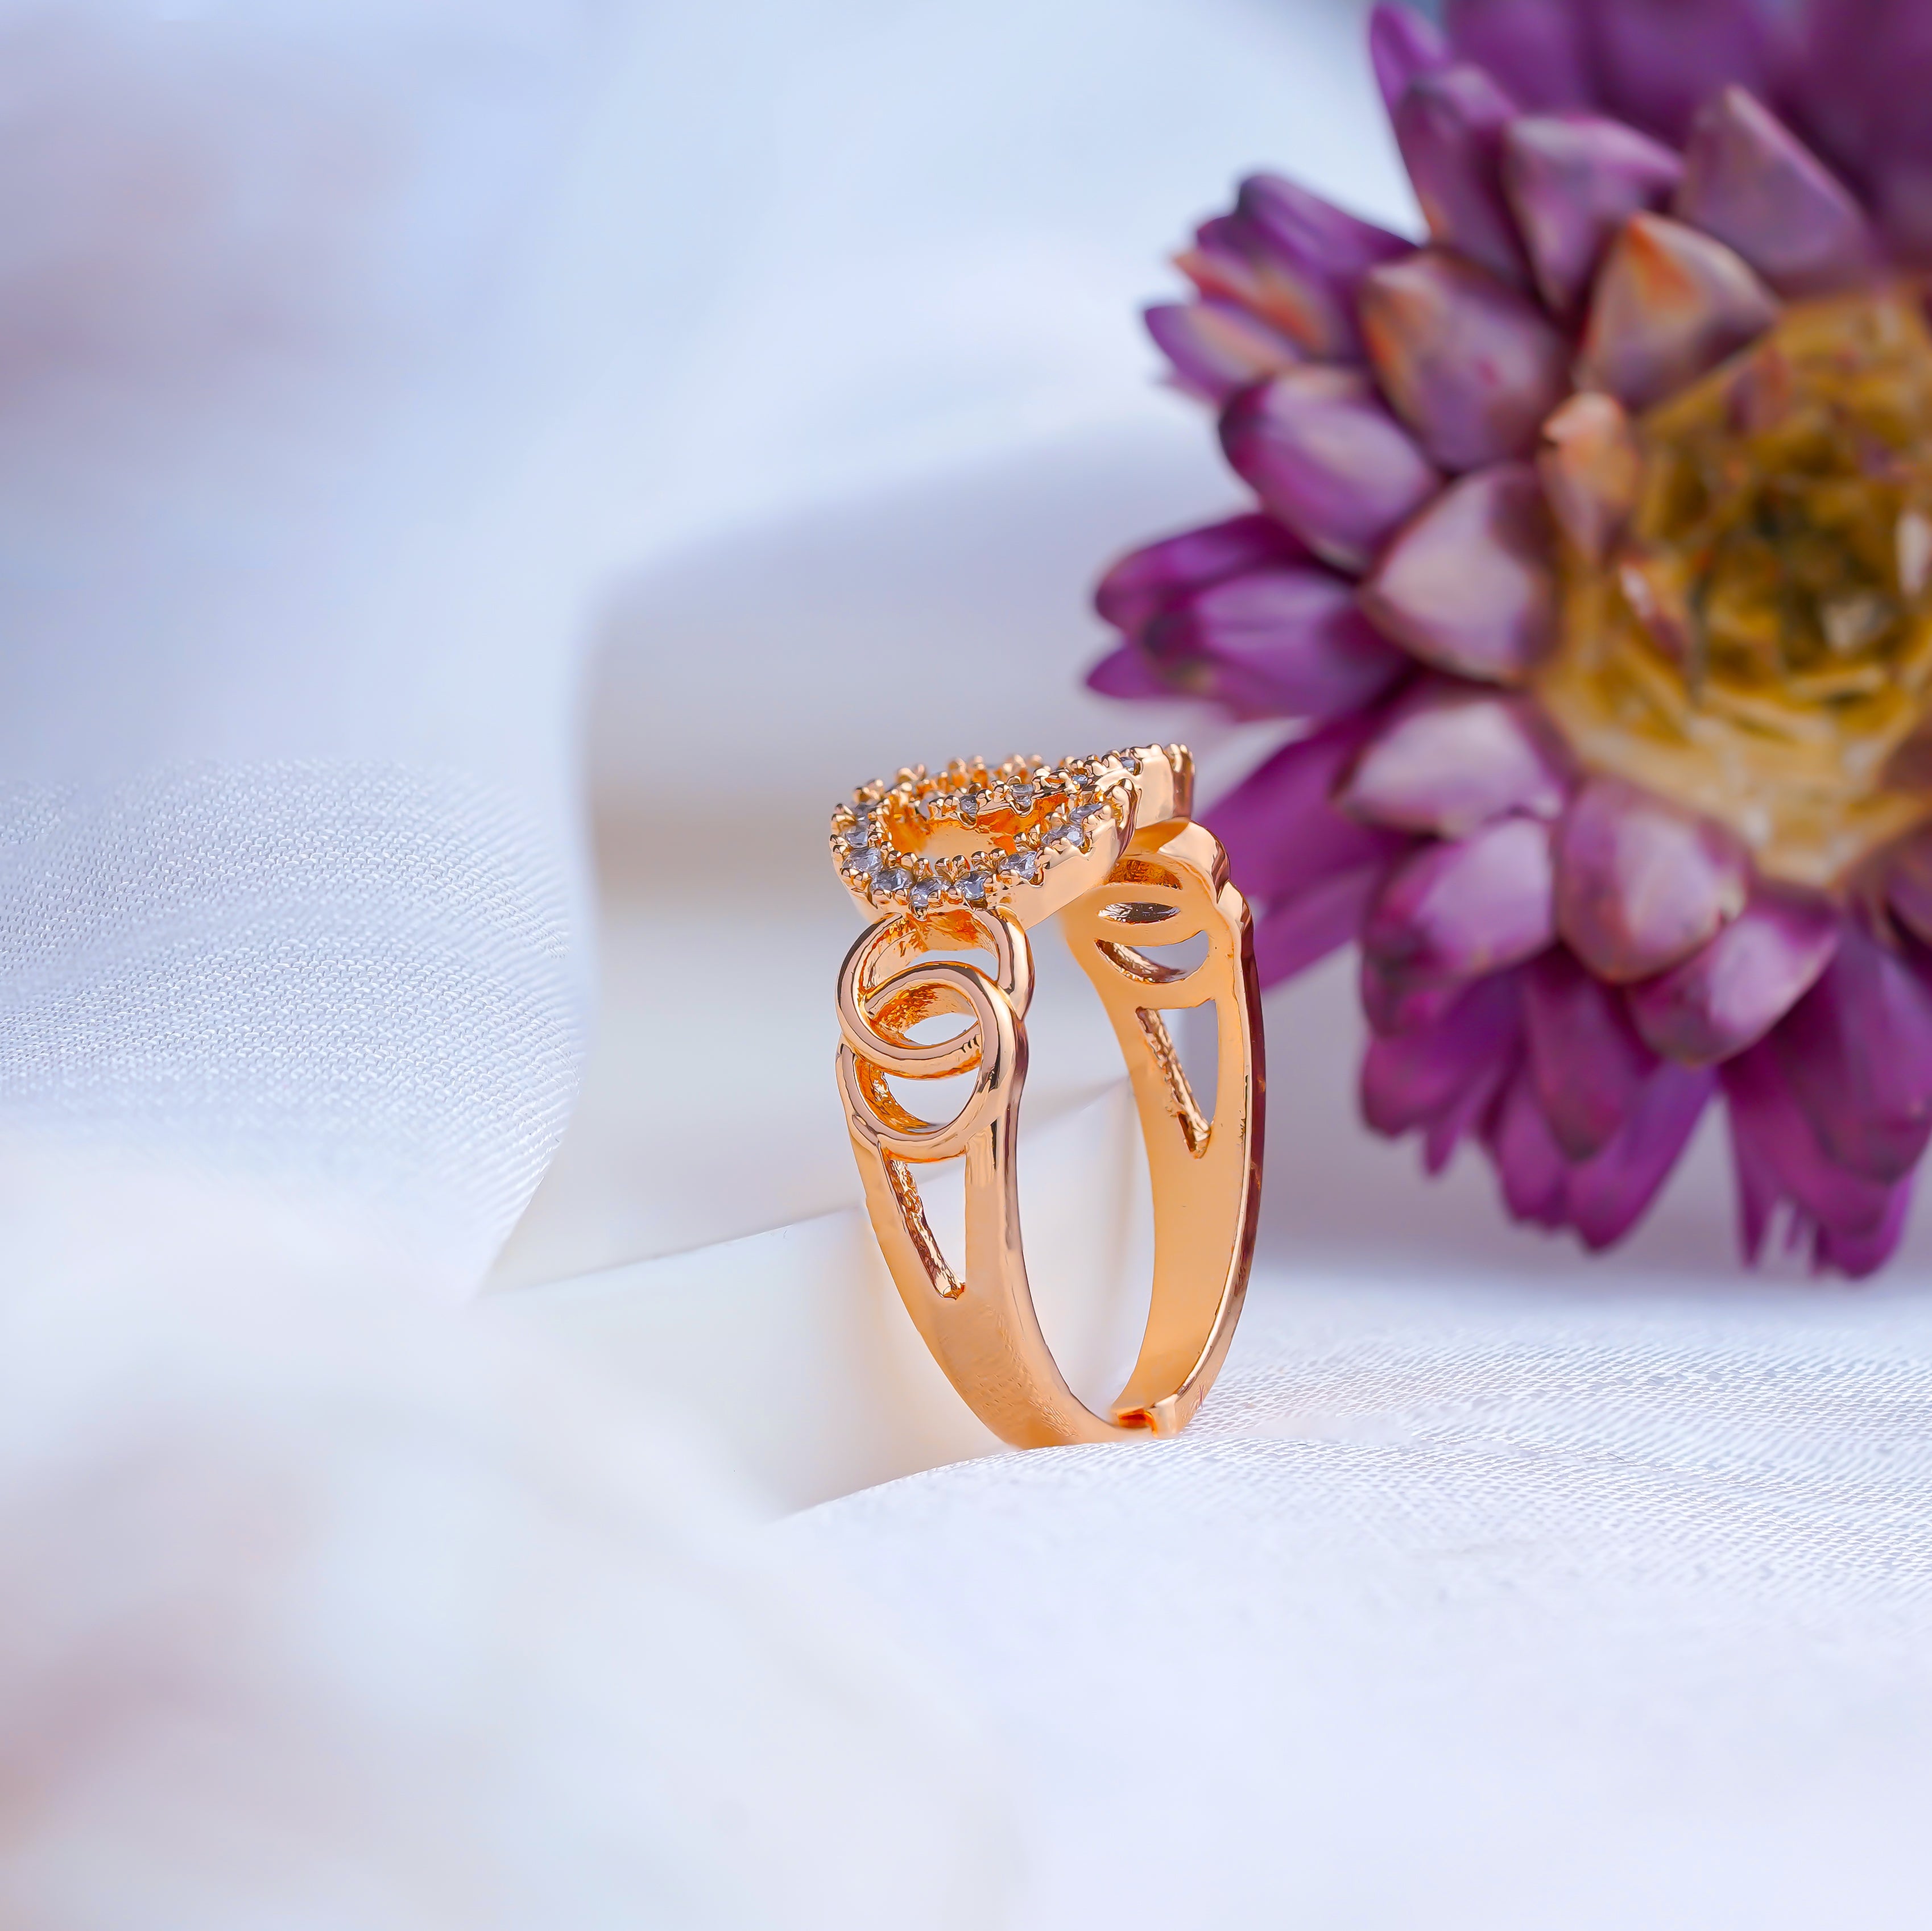 "Jewelsium Serenity: Find Peace and Beauty in Our Rings"